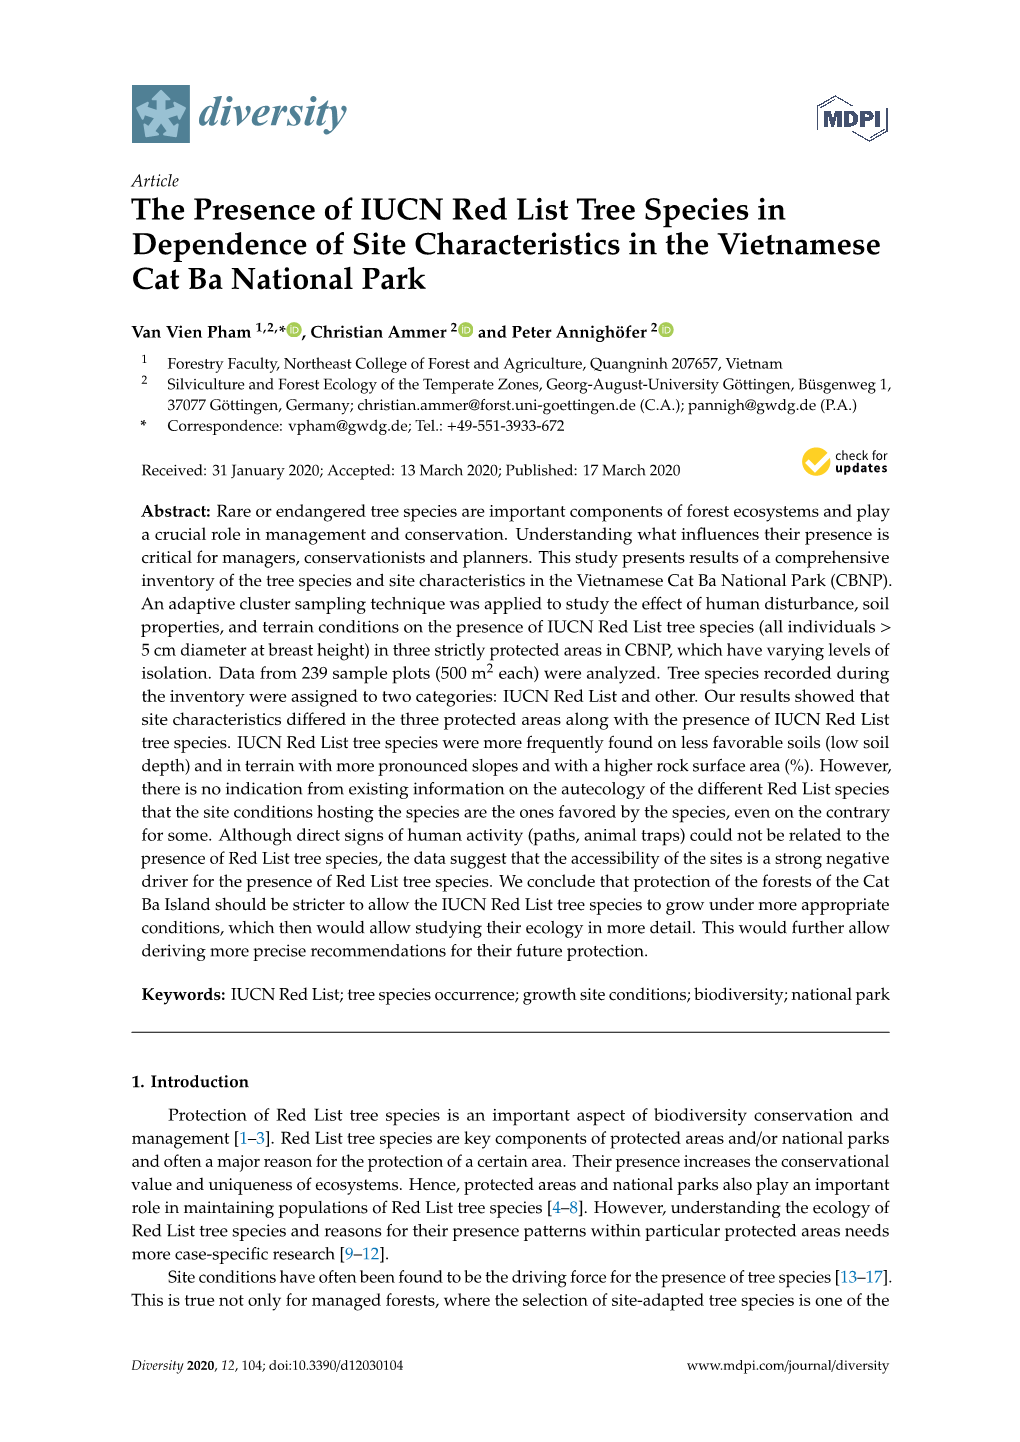 The Presence of IUCN Red List Tree Species in Dependence of Site Characteristics in the Vietnamese Cat Ba National Park